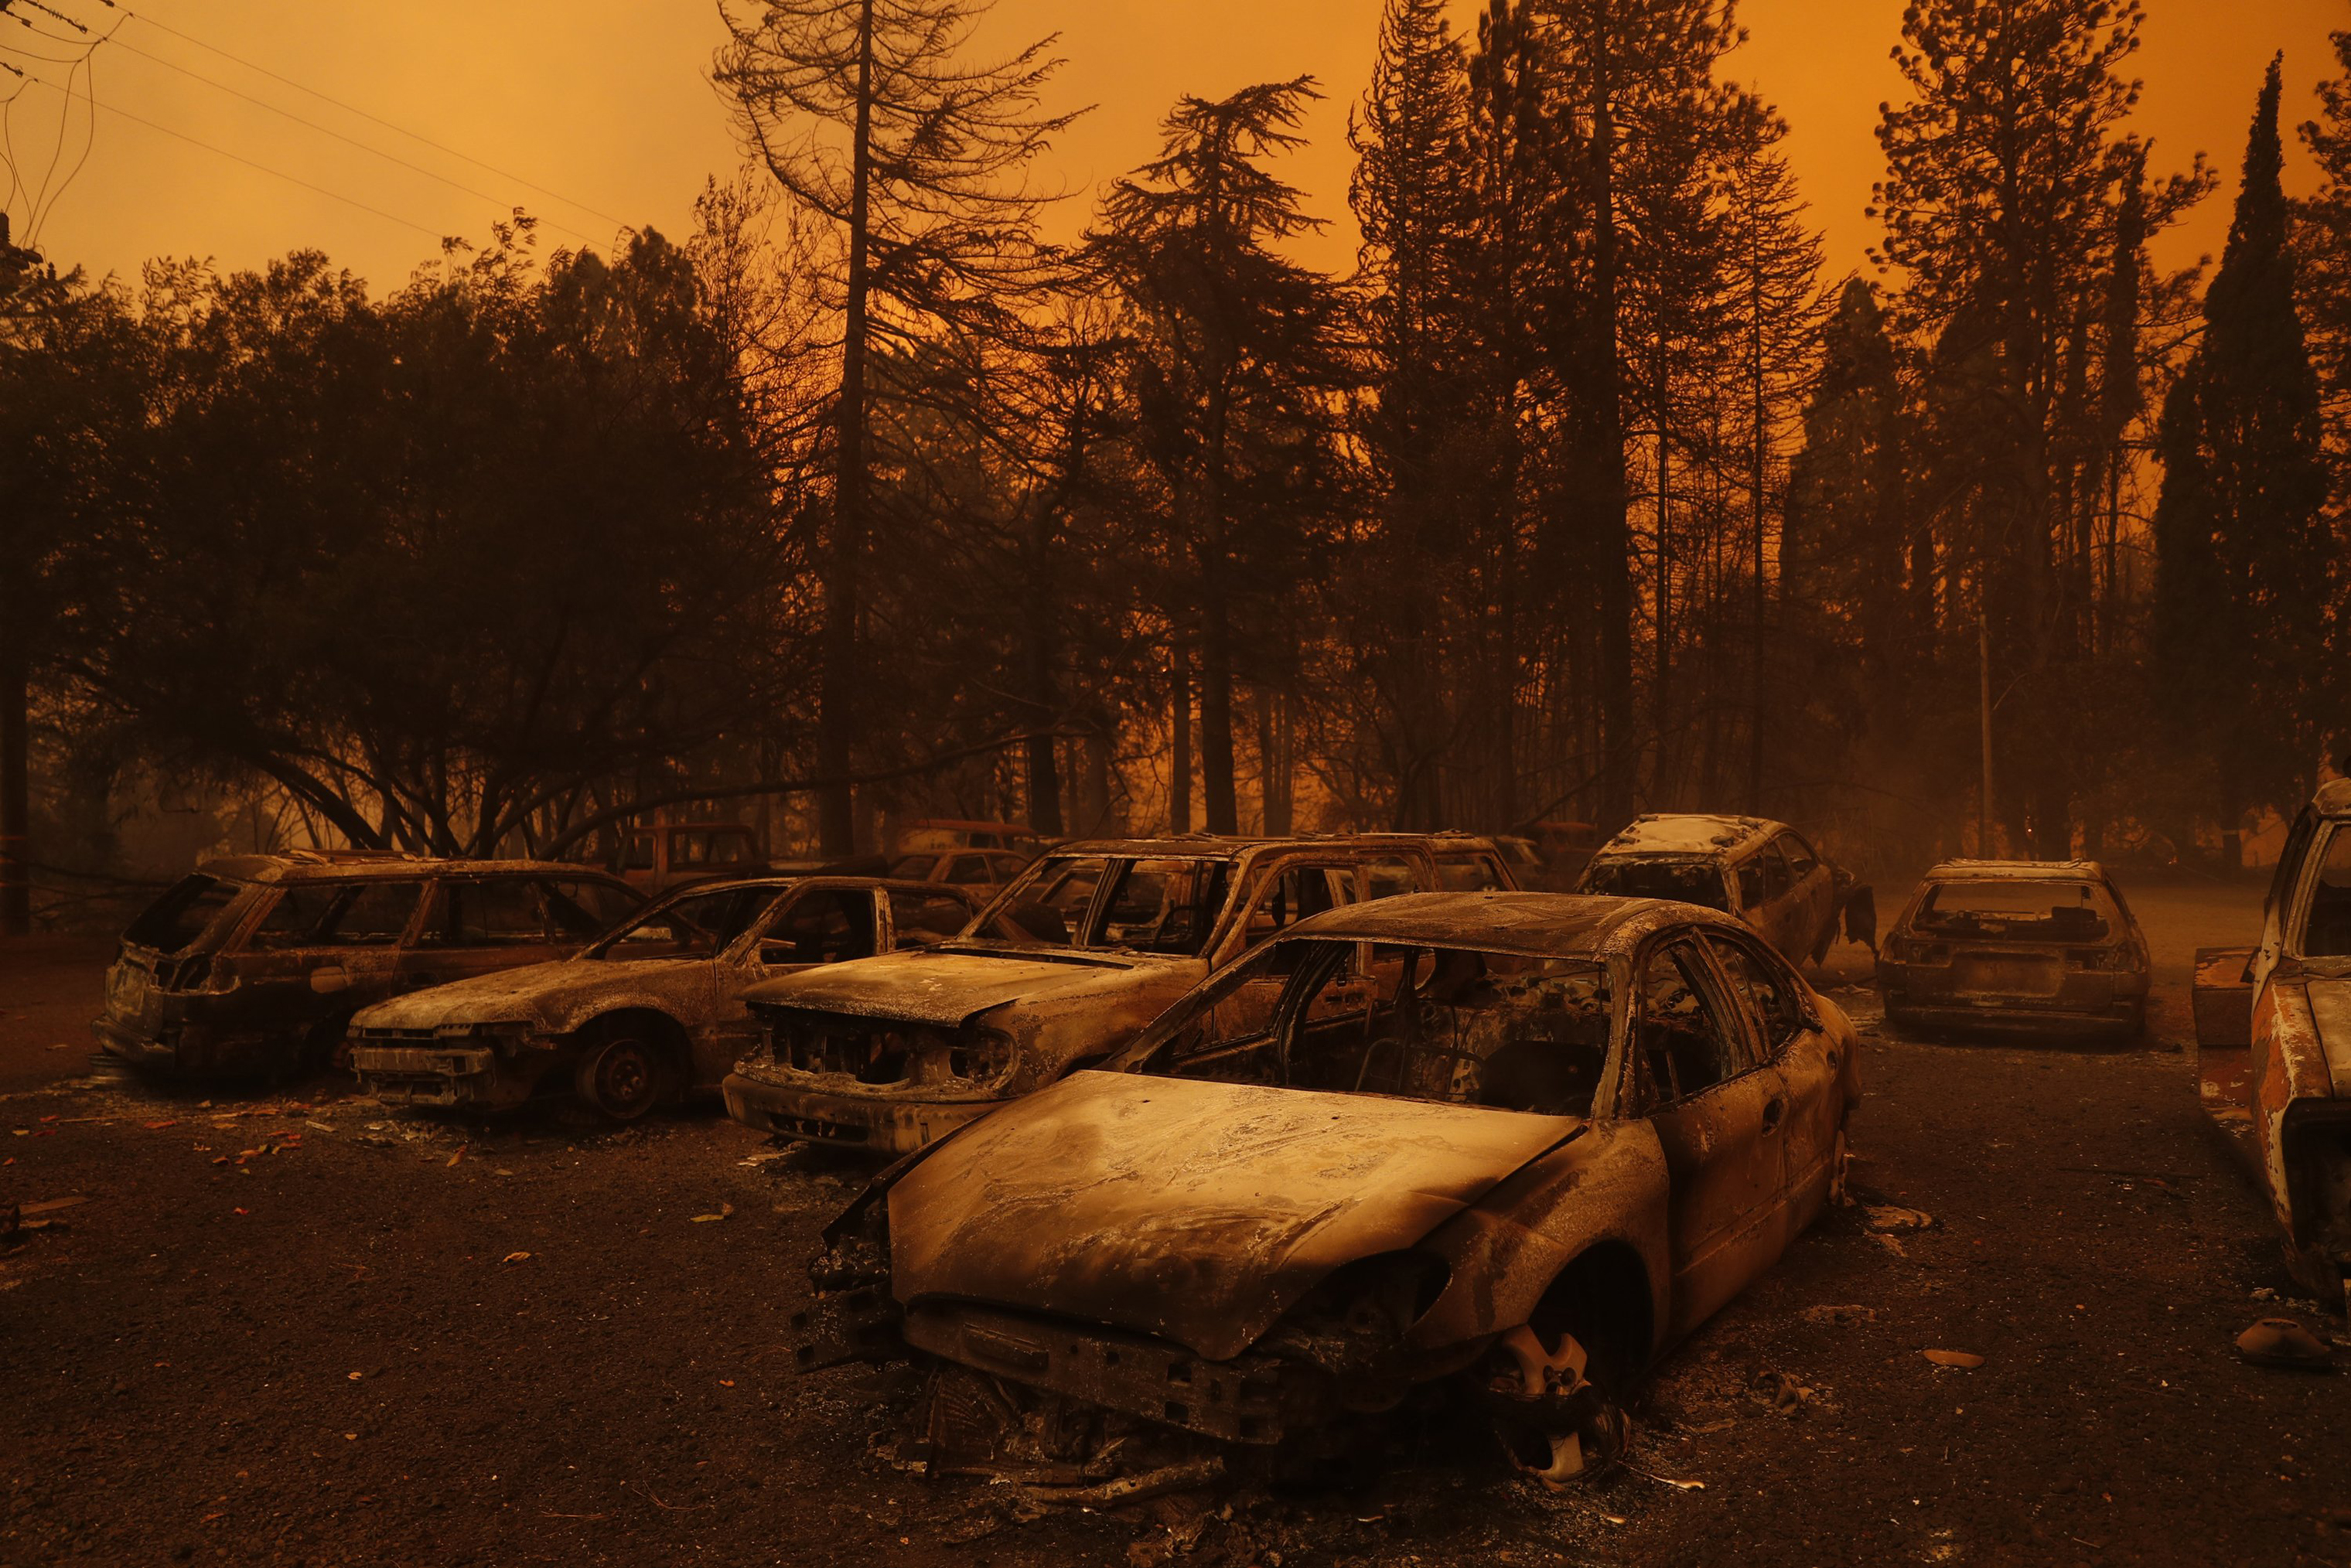 Burned vehicles during the Camp Fire in Paradise, Calif. on Nov. 8. (Scott Strazzante—San Francisco Chronicle/Polaris)